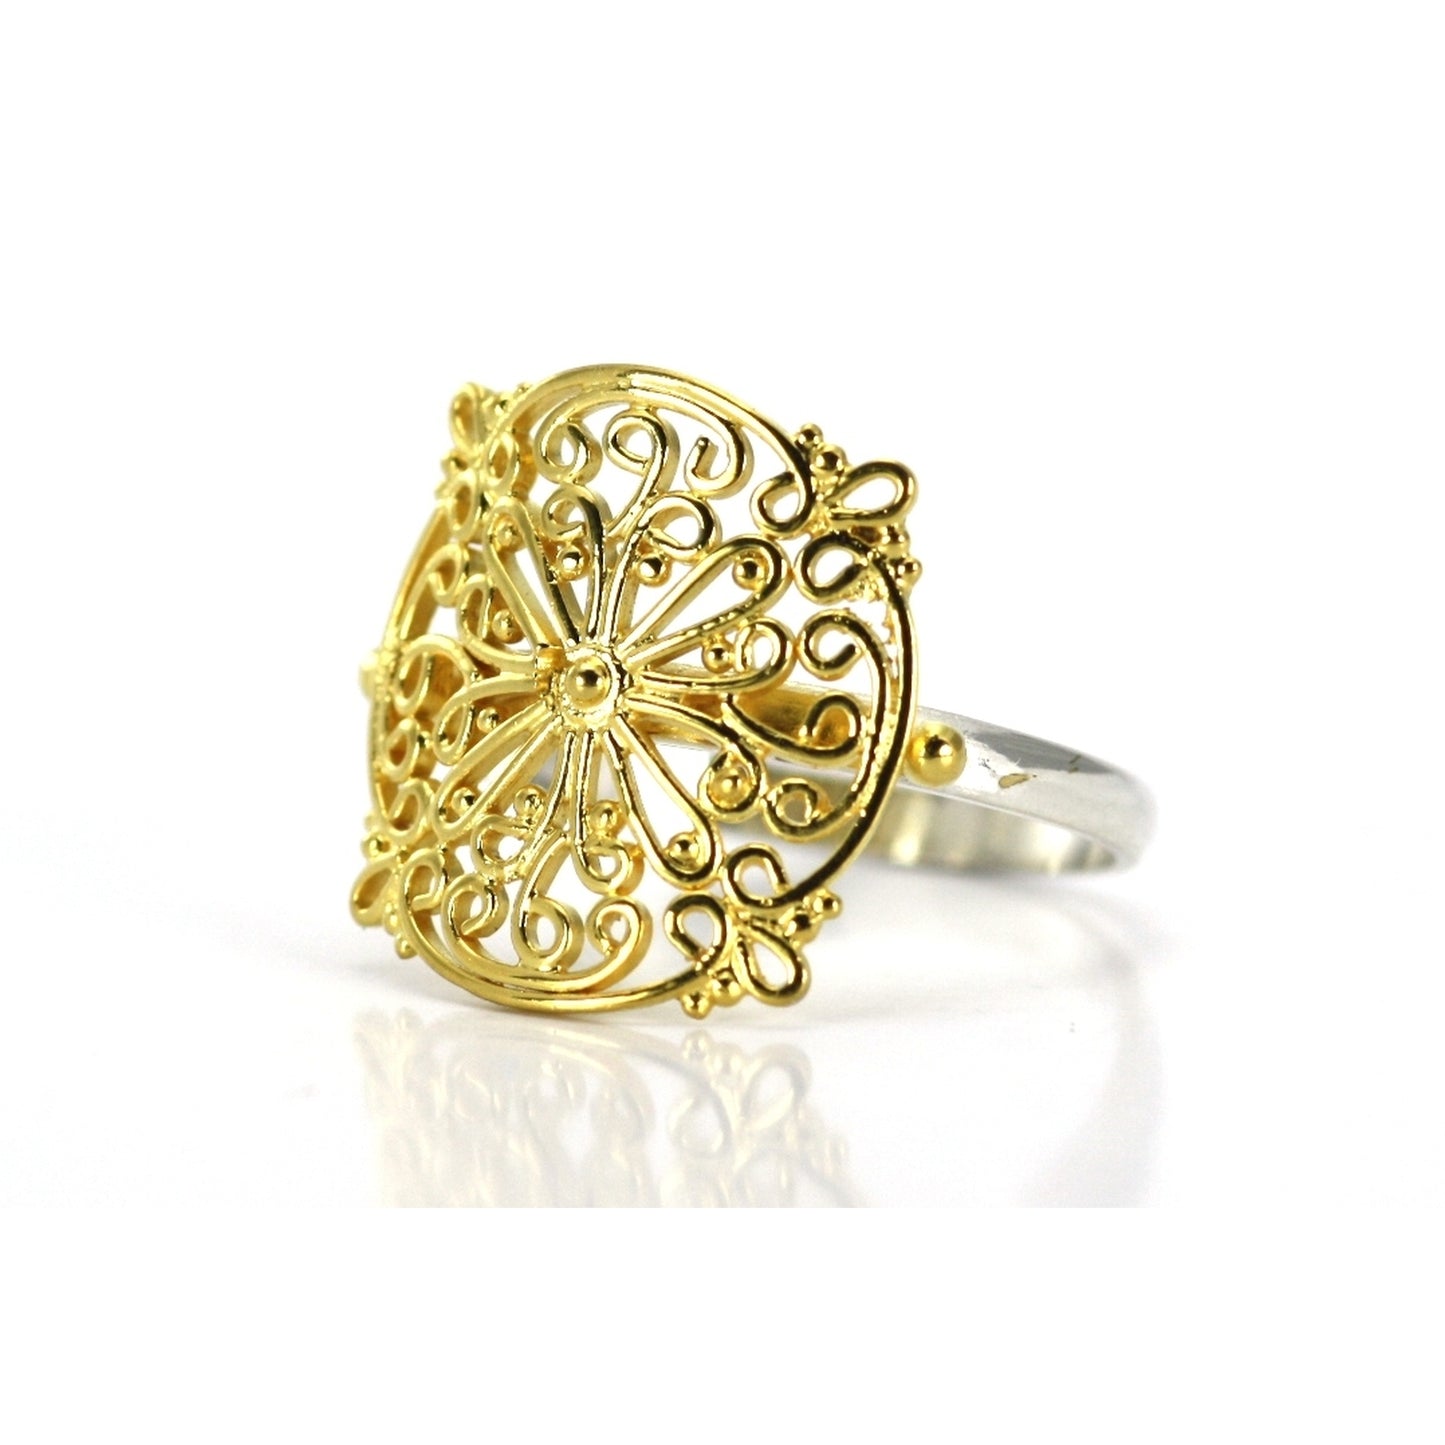 Silver and gold ring with wire filigree design.